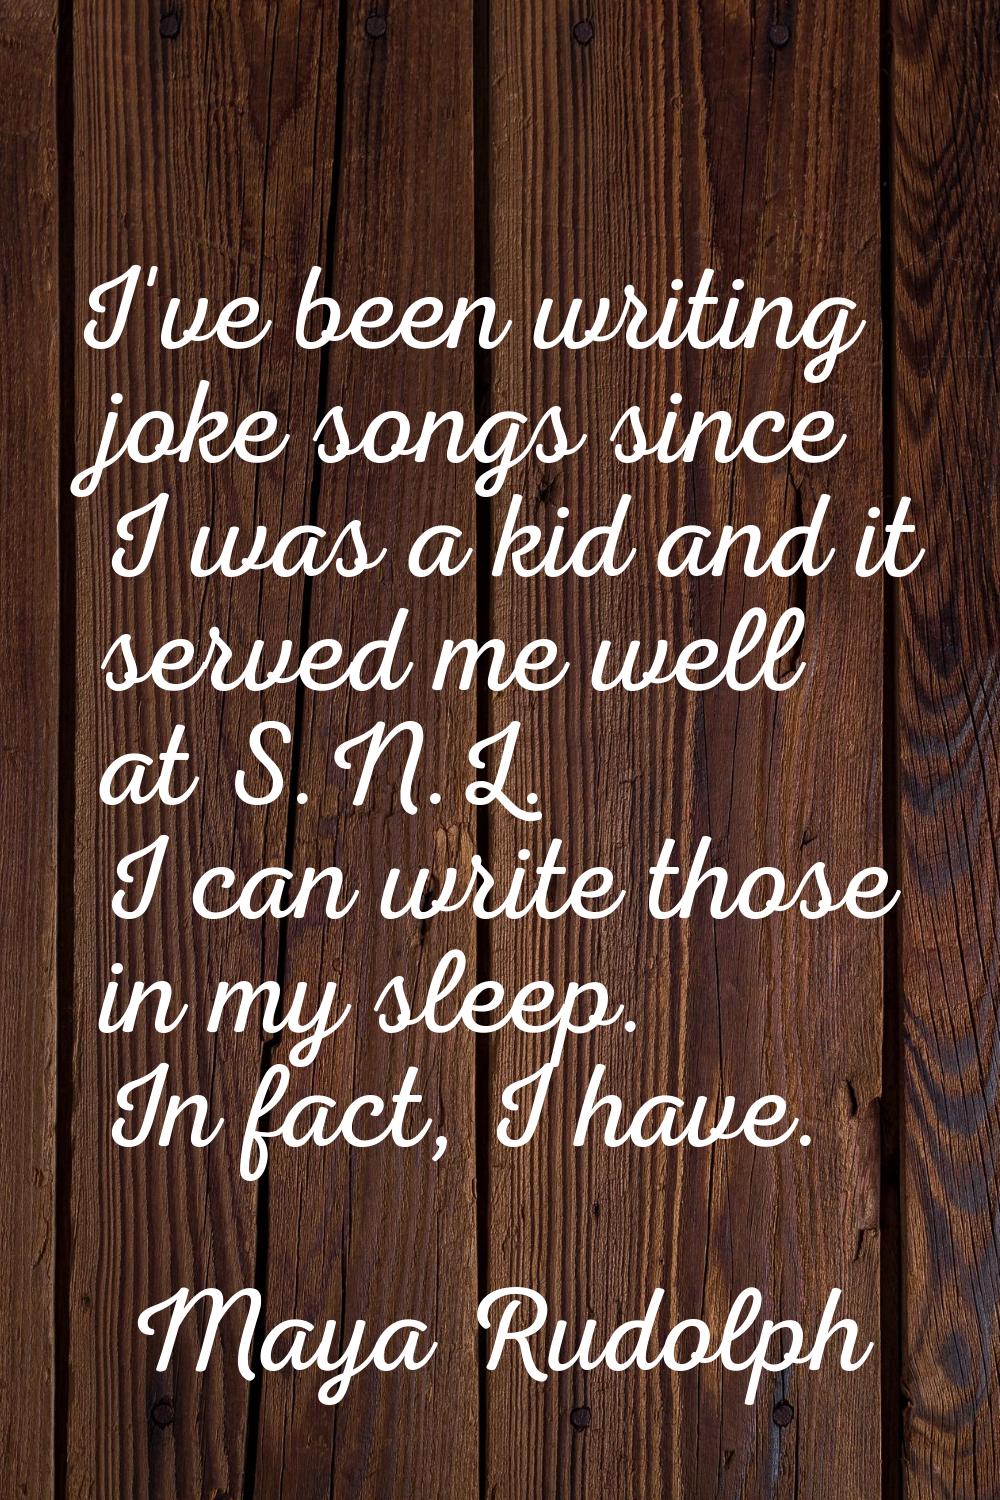 I've been writing joke songs since I was a kid and it served me well at S.N.L. I can write those in